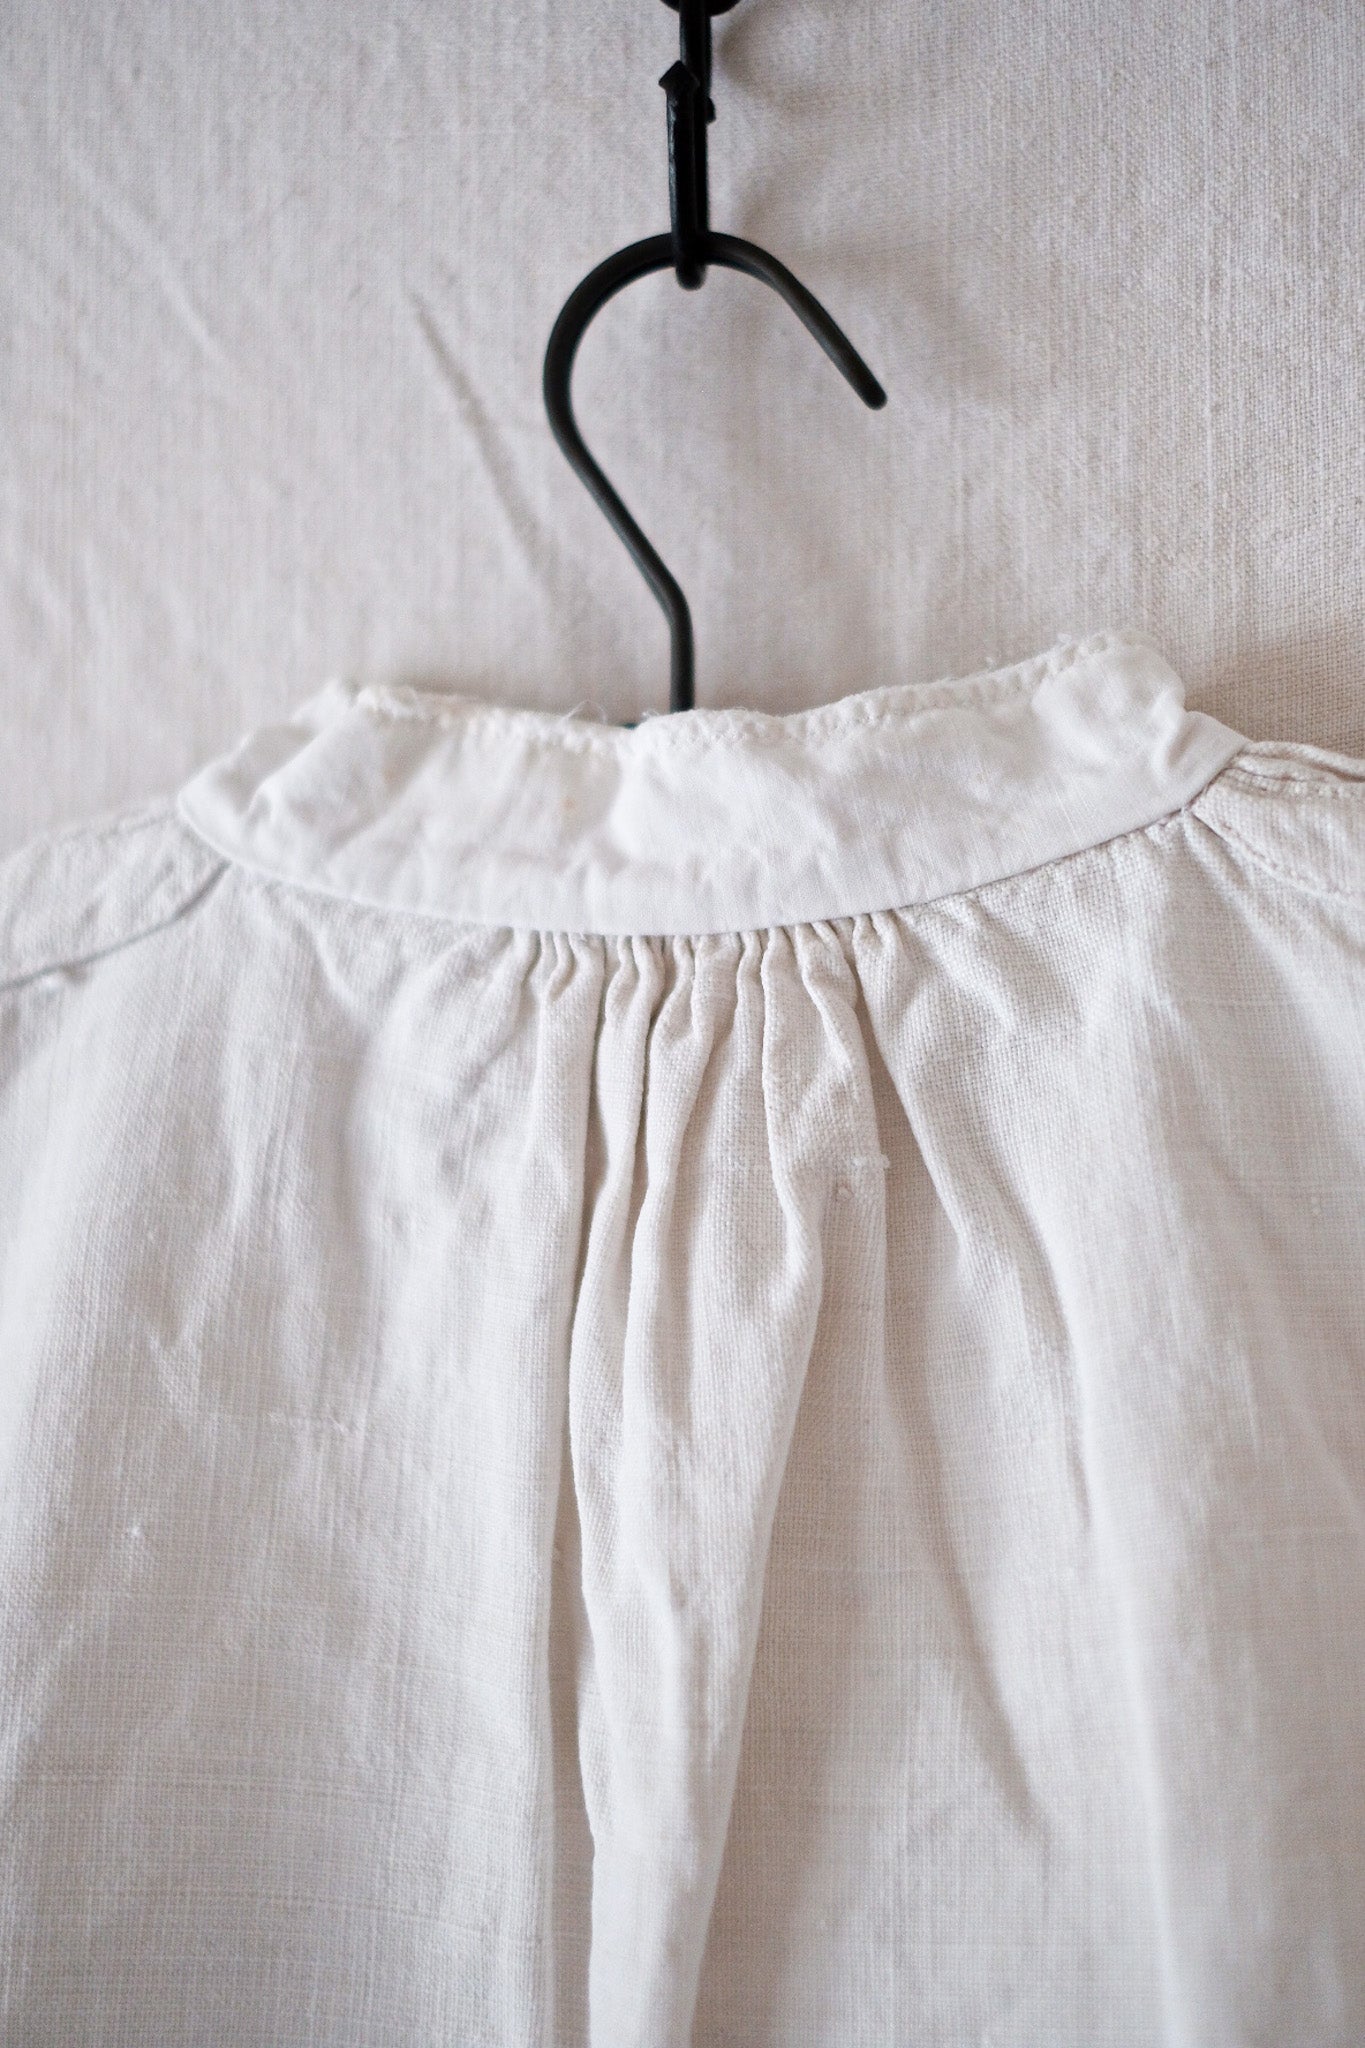 【Early 20th C】French Antique Linen Shirt